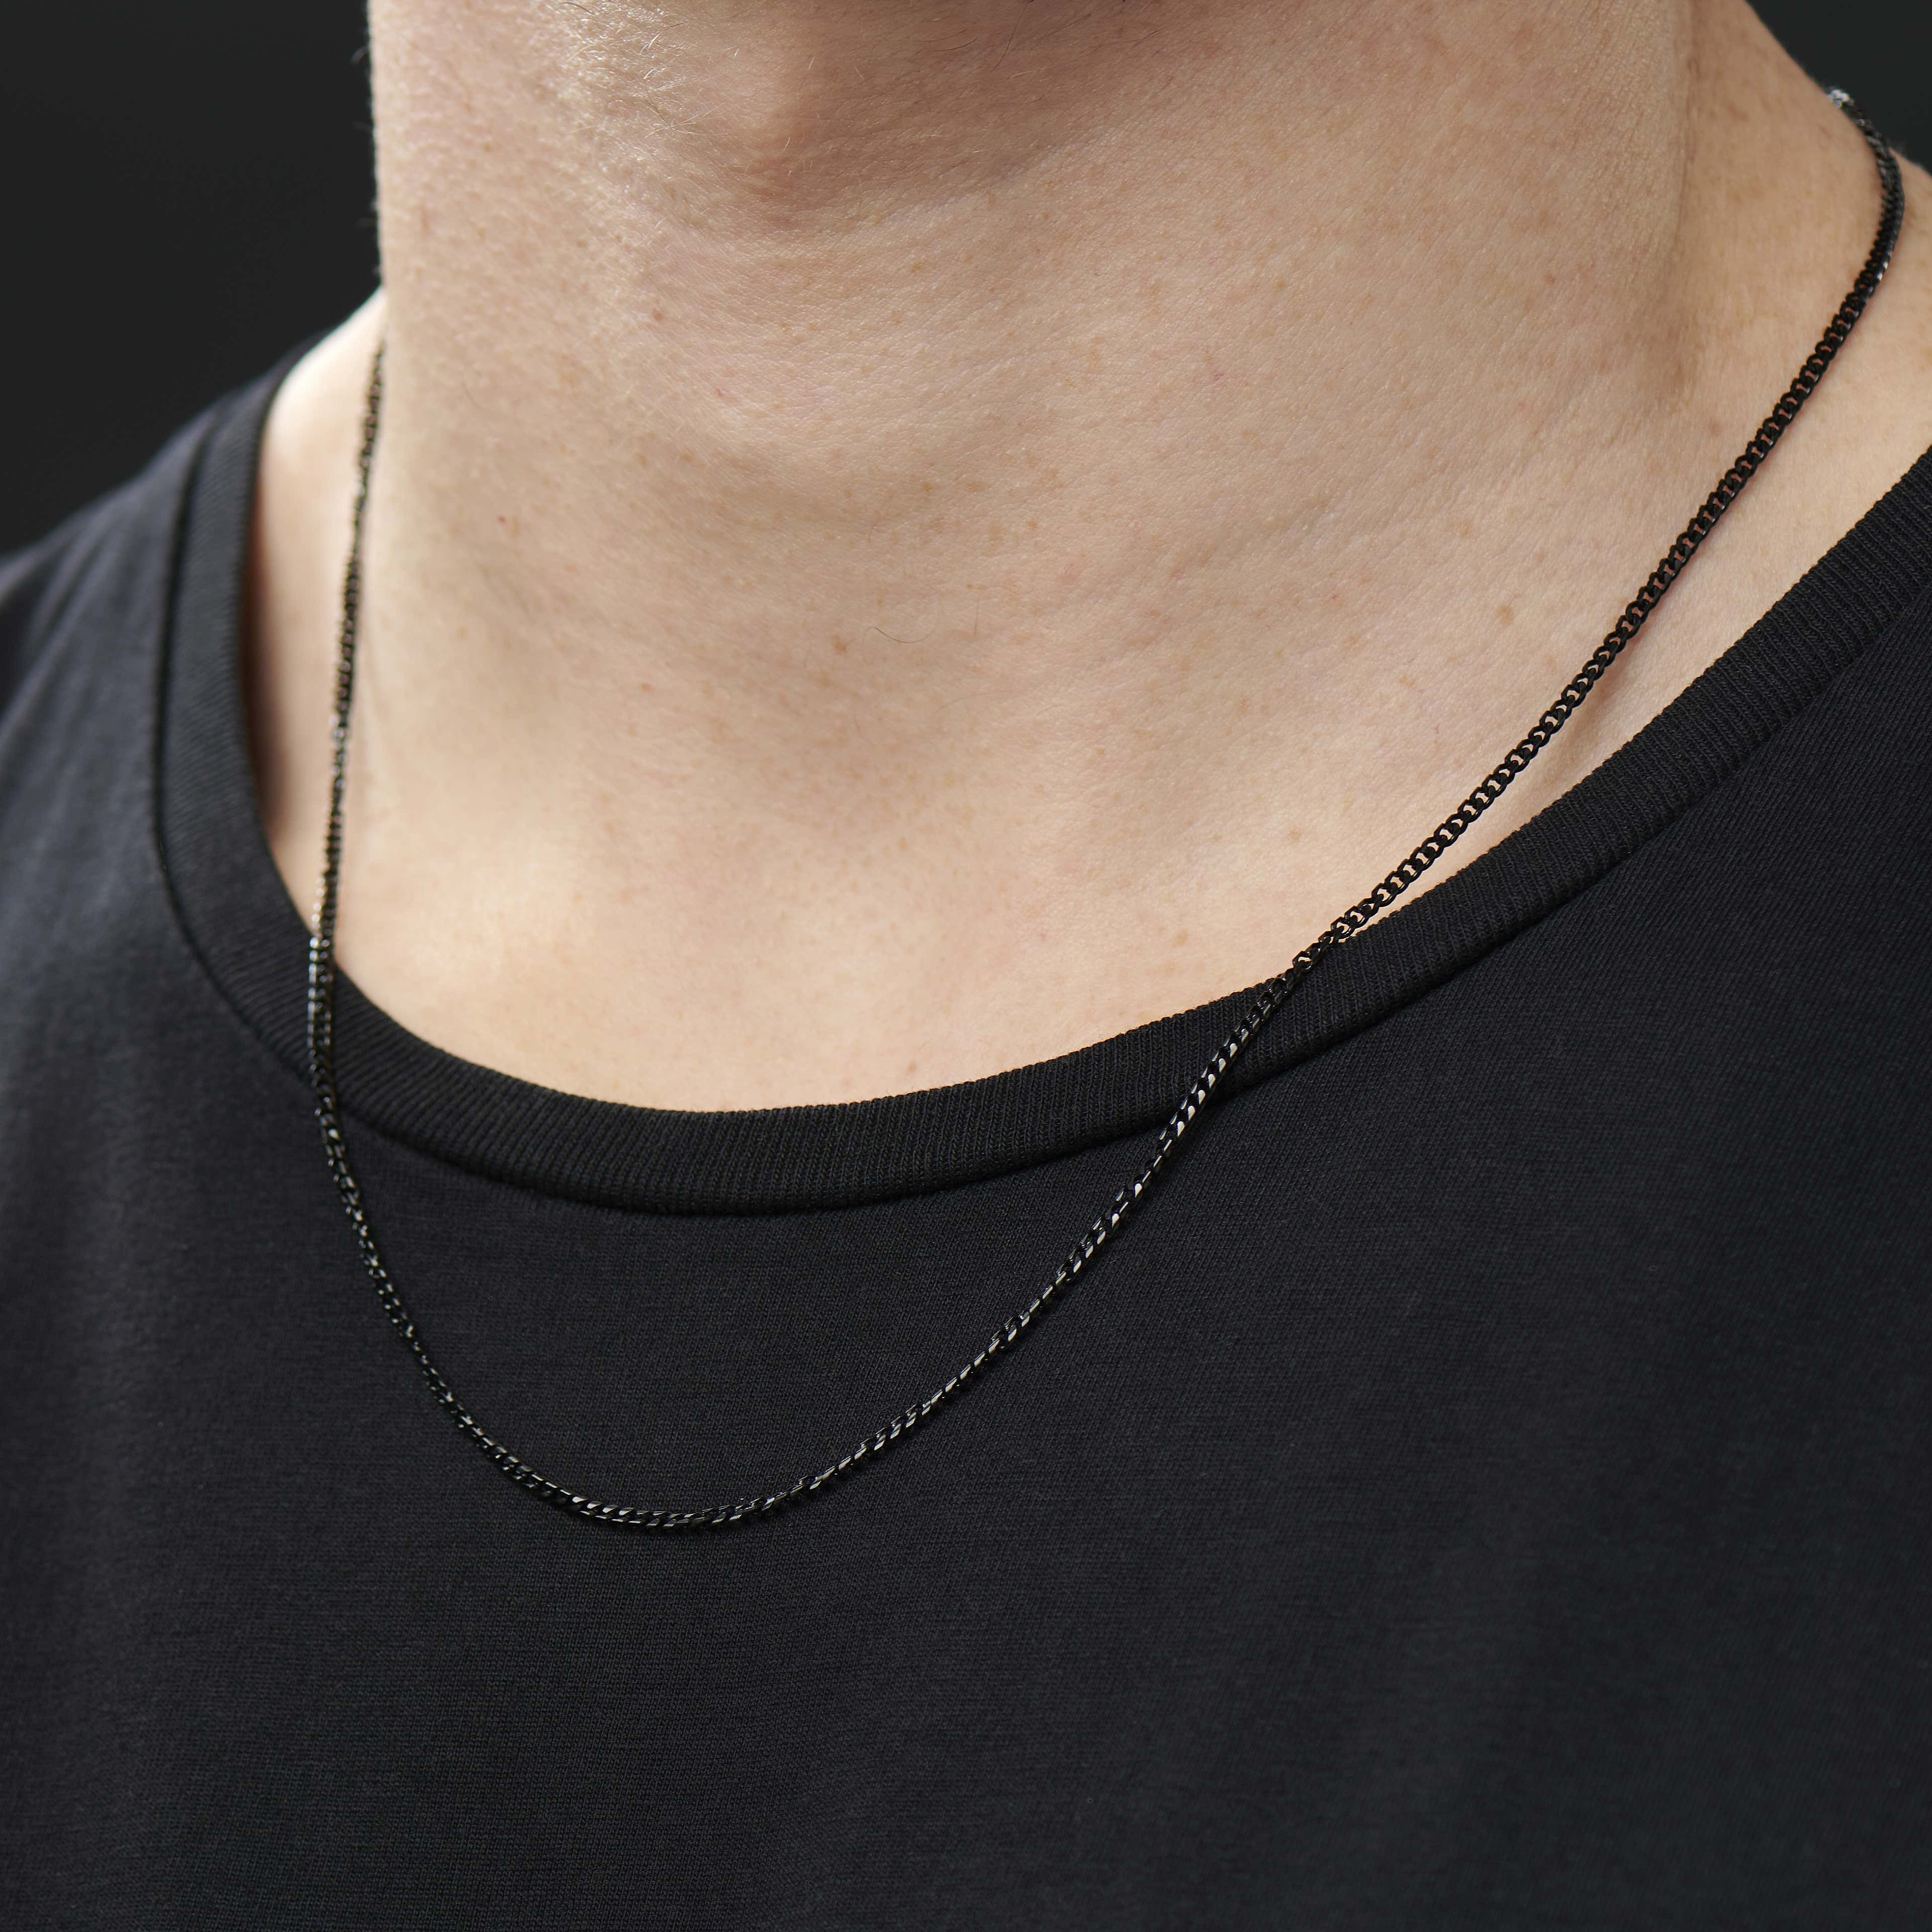 2mm Black Chain Necklace - 4 - hover gallery